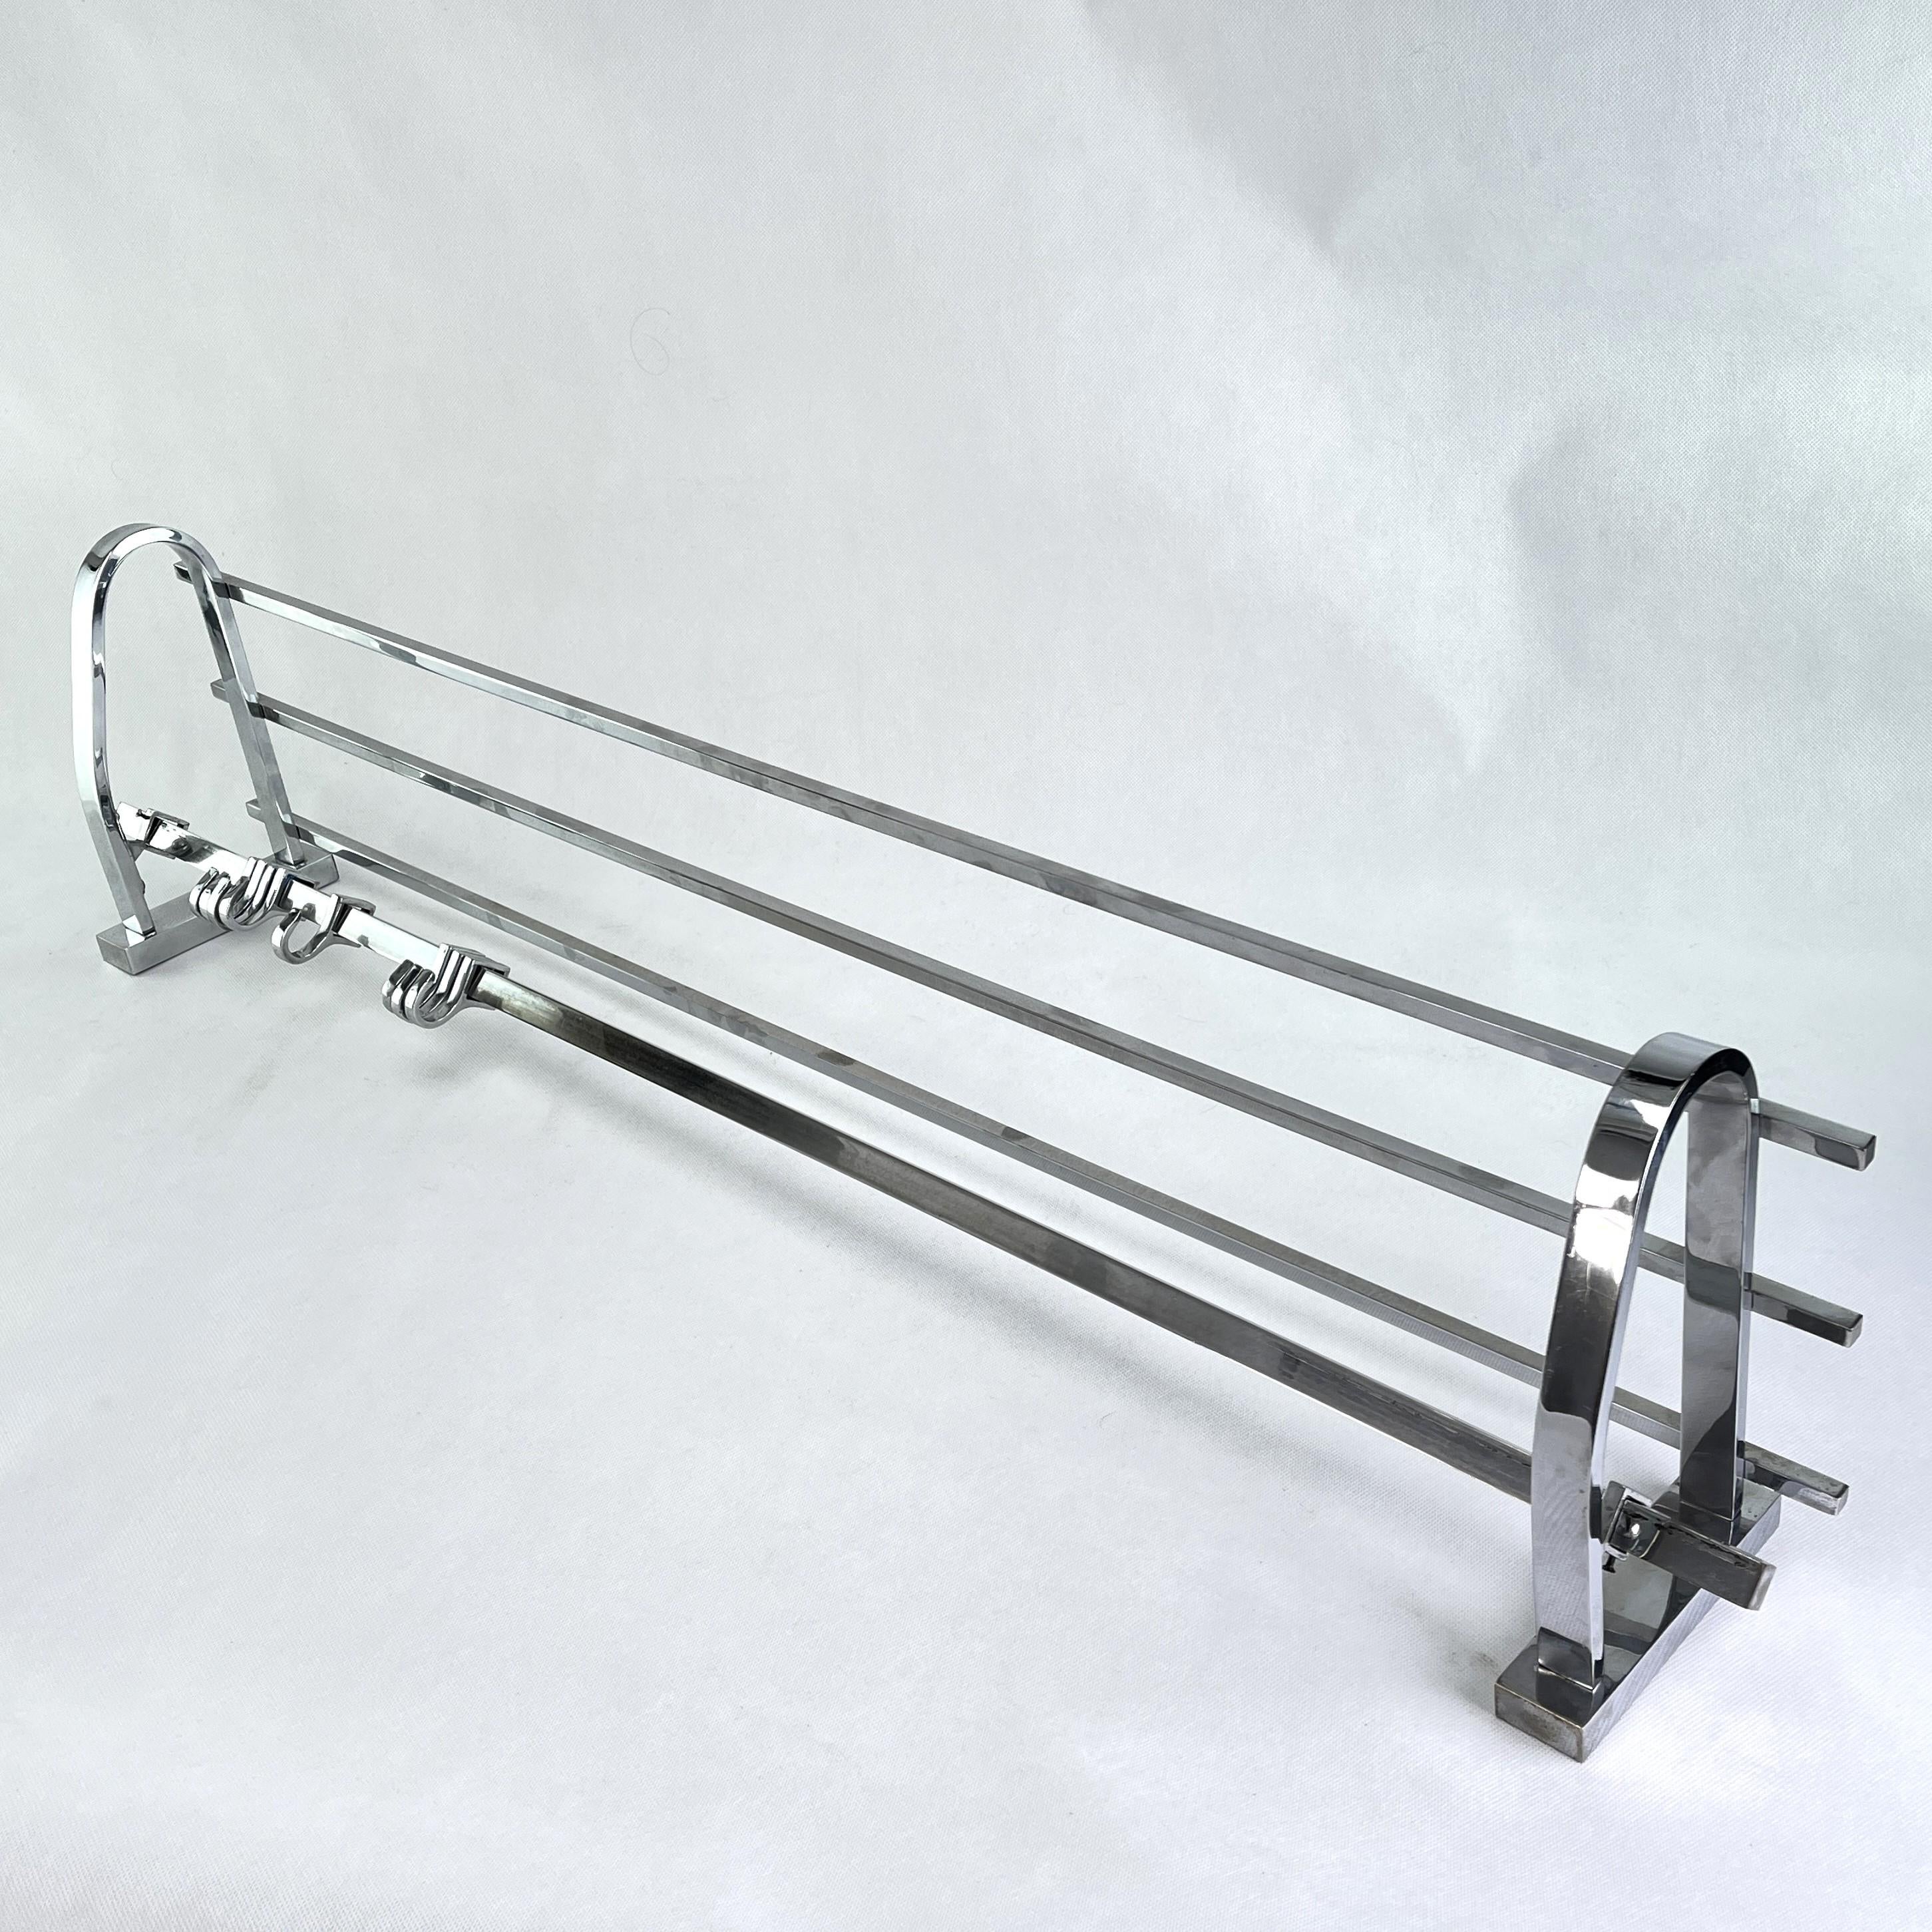 Art Deco wardrobe chrome - 1930s.

This beautiful french wall coat rack from the 1930s is in the streamline modern Art Deco style. This style emphasized curvy streamlined shapes. This is a beautiful, timeless and antique piece that will leave a